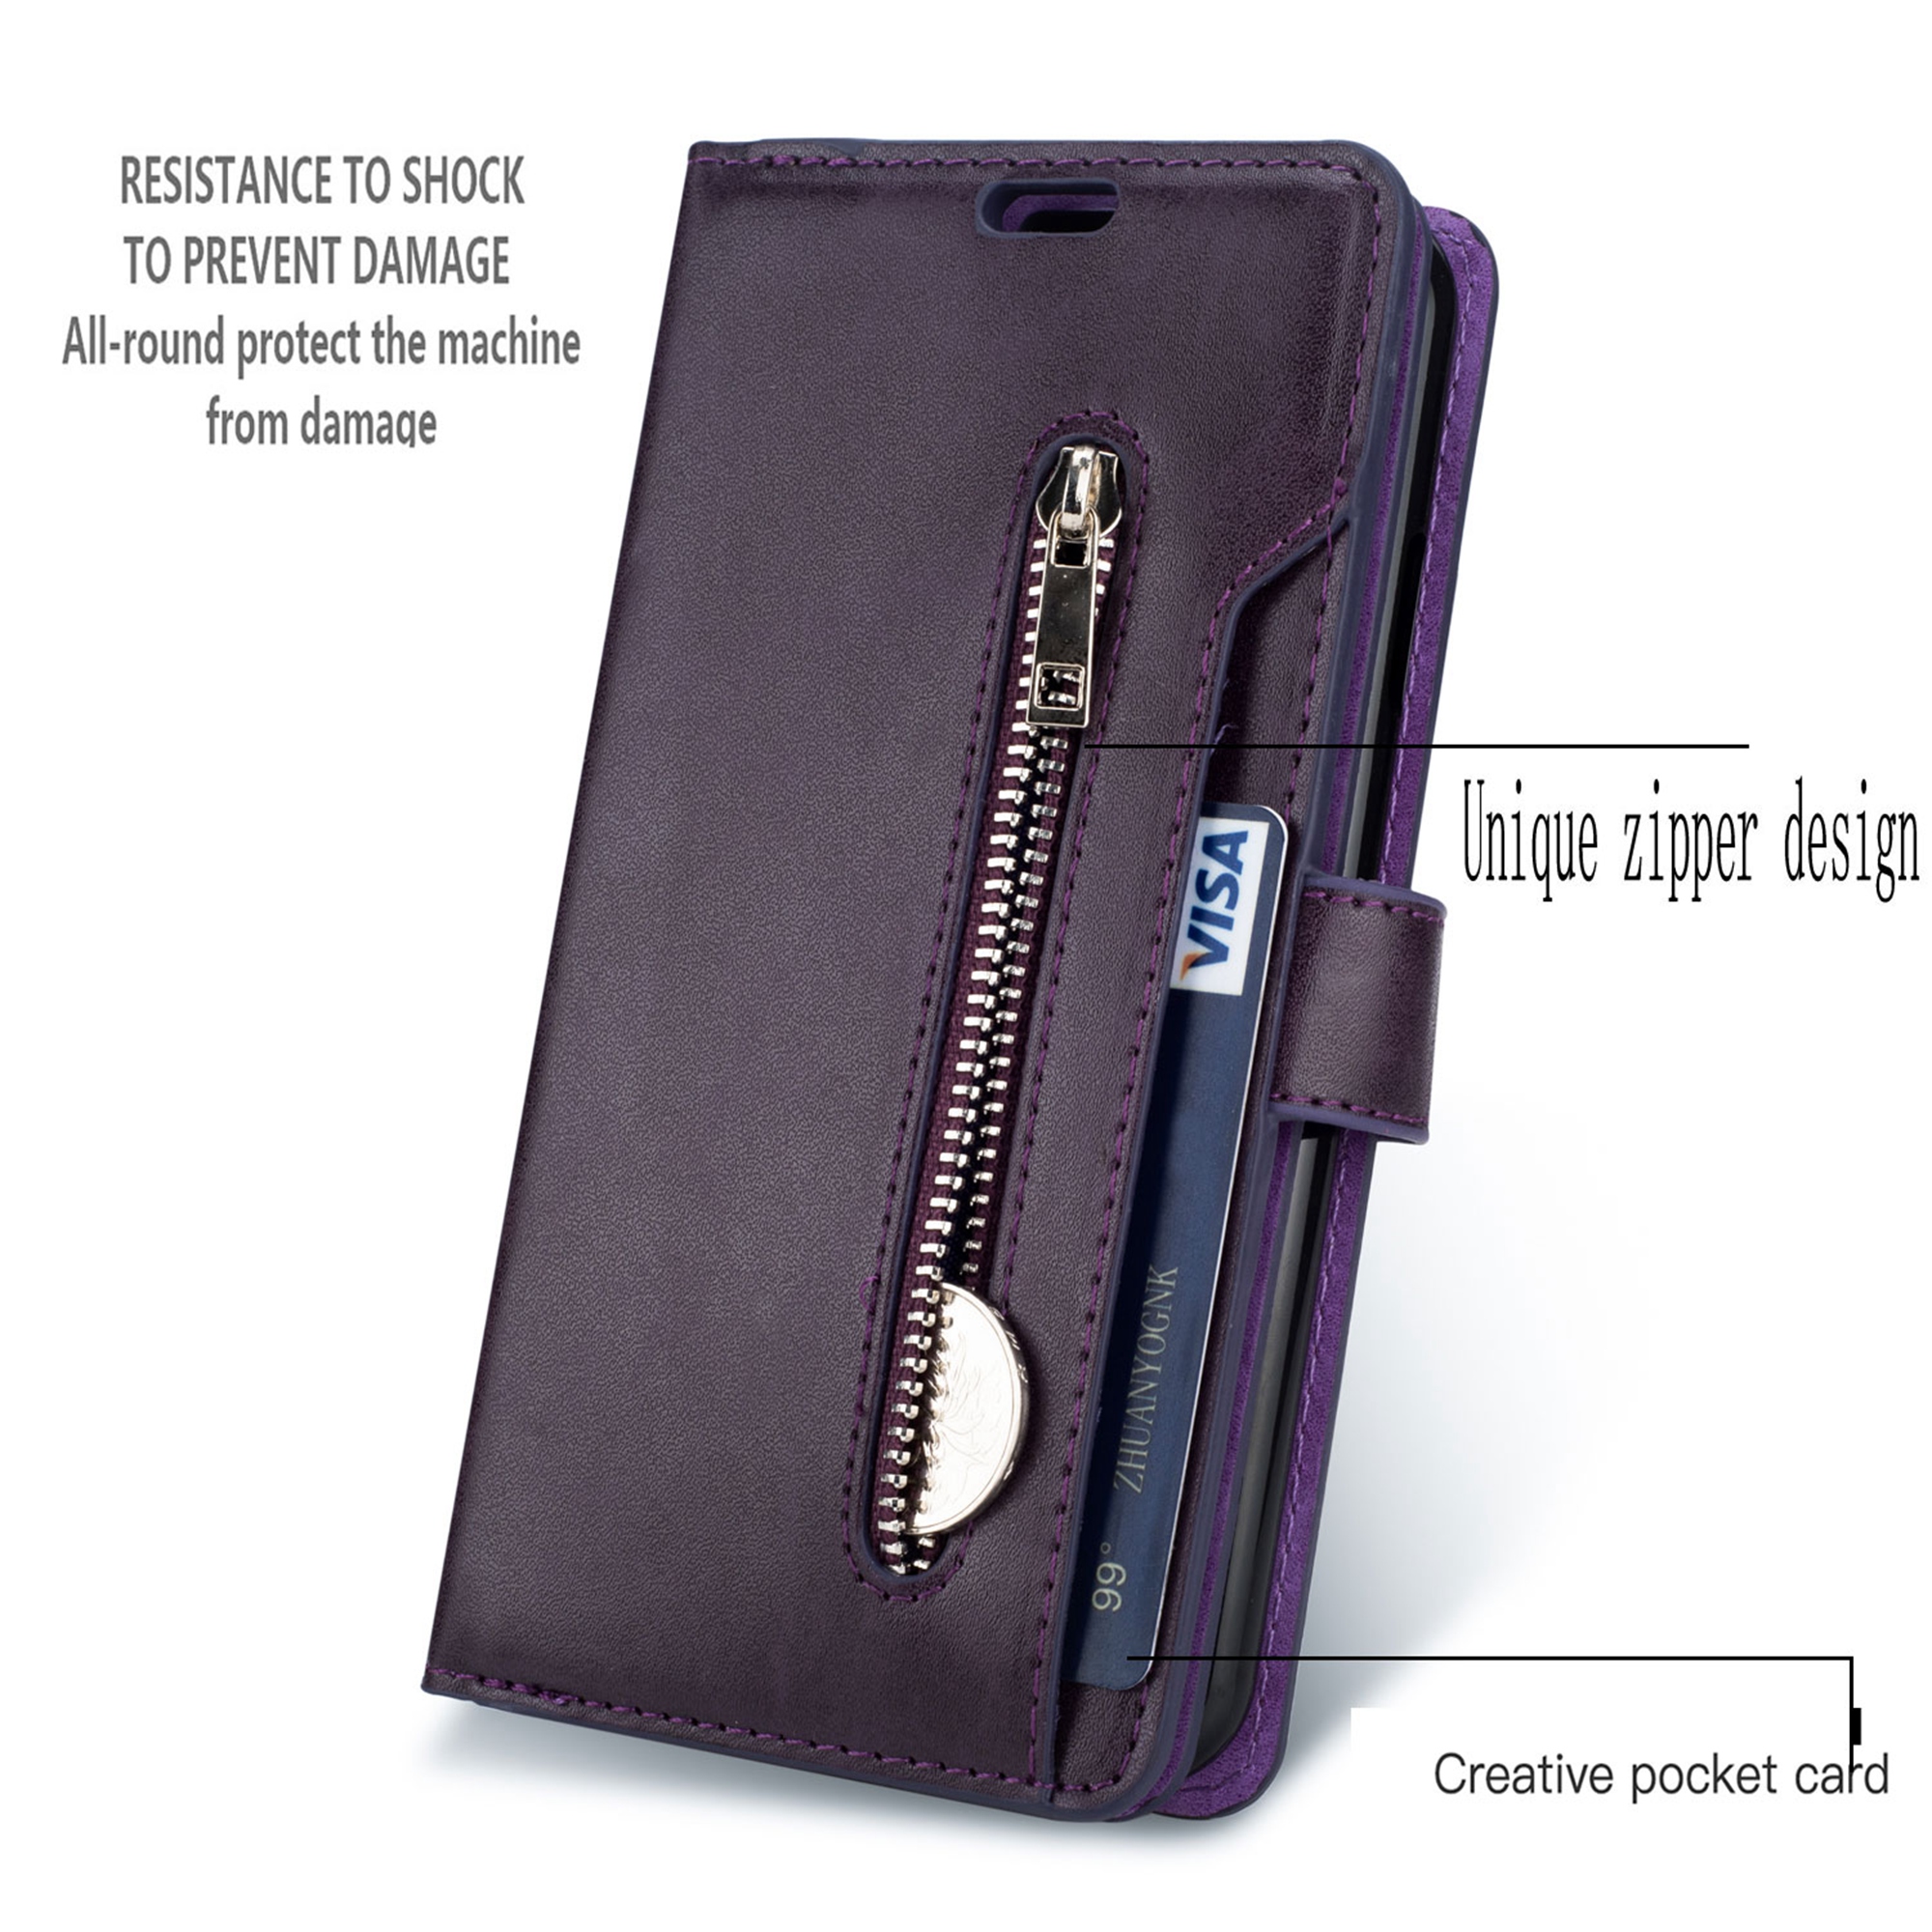 iPhone 11 Pro Max 6.5 inch Wallet Case, Dteck 9 Card Slots Premium Leather Zipper Purse case Flip Kickstand Folio Magnetic with Wrist Strap Credit Cash Cover For Apple iPhone 11 Pro Max, Purple - image 3 of 7